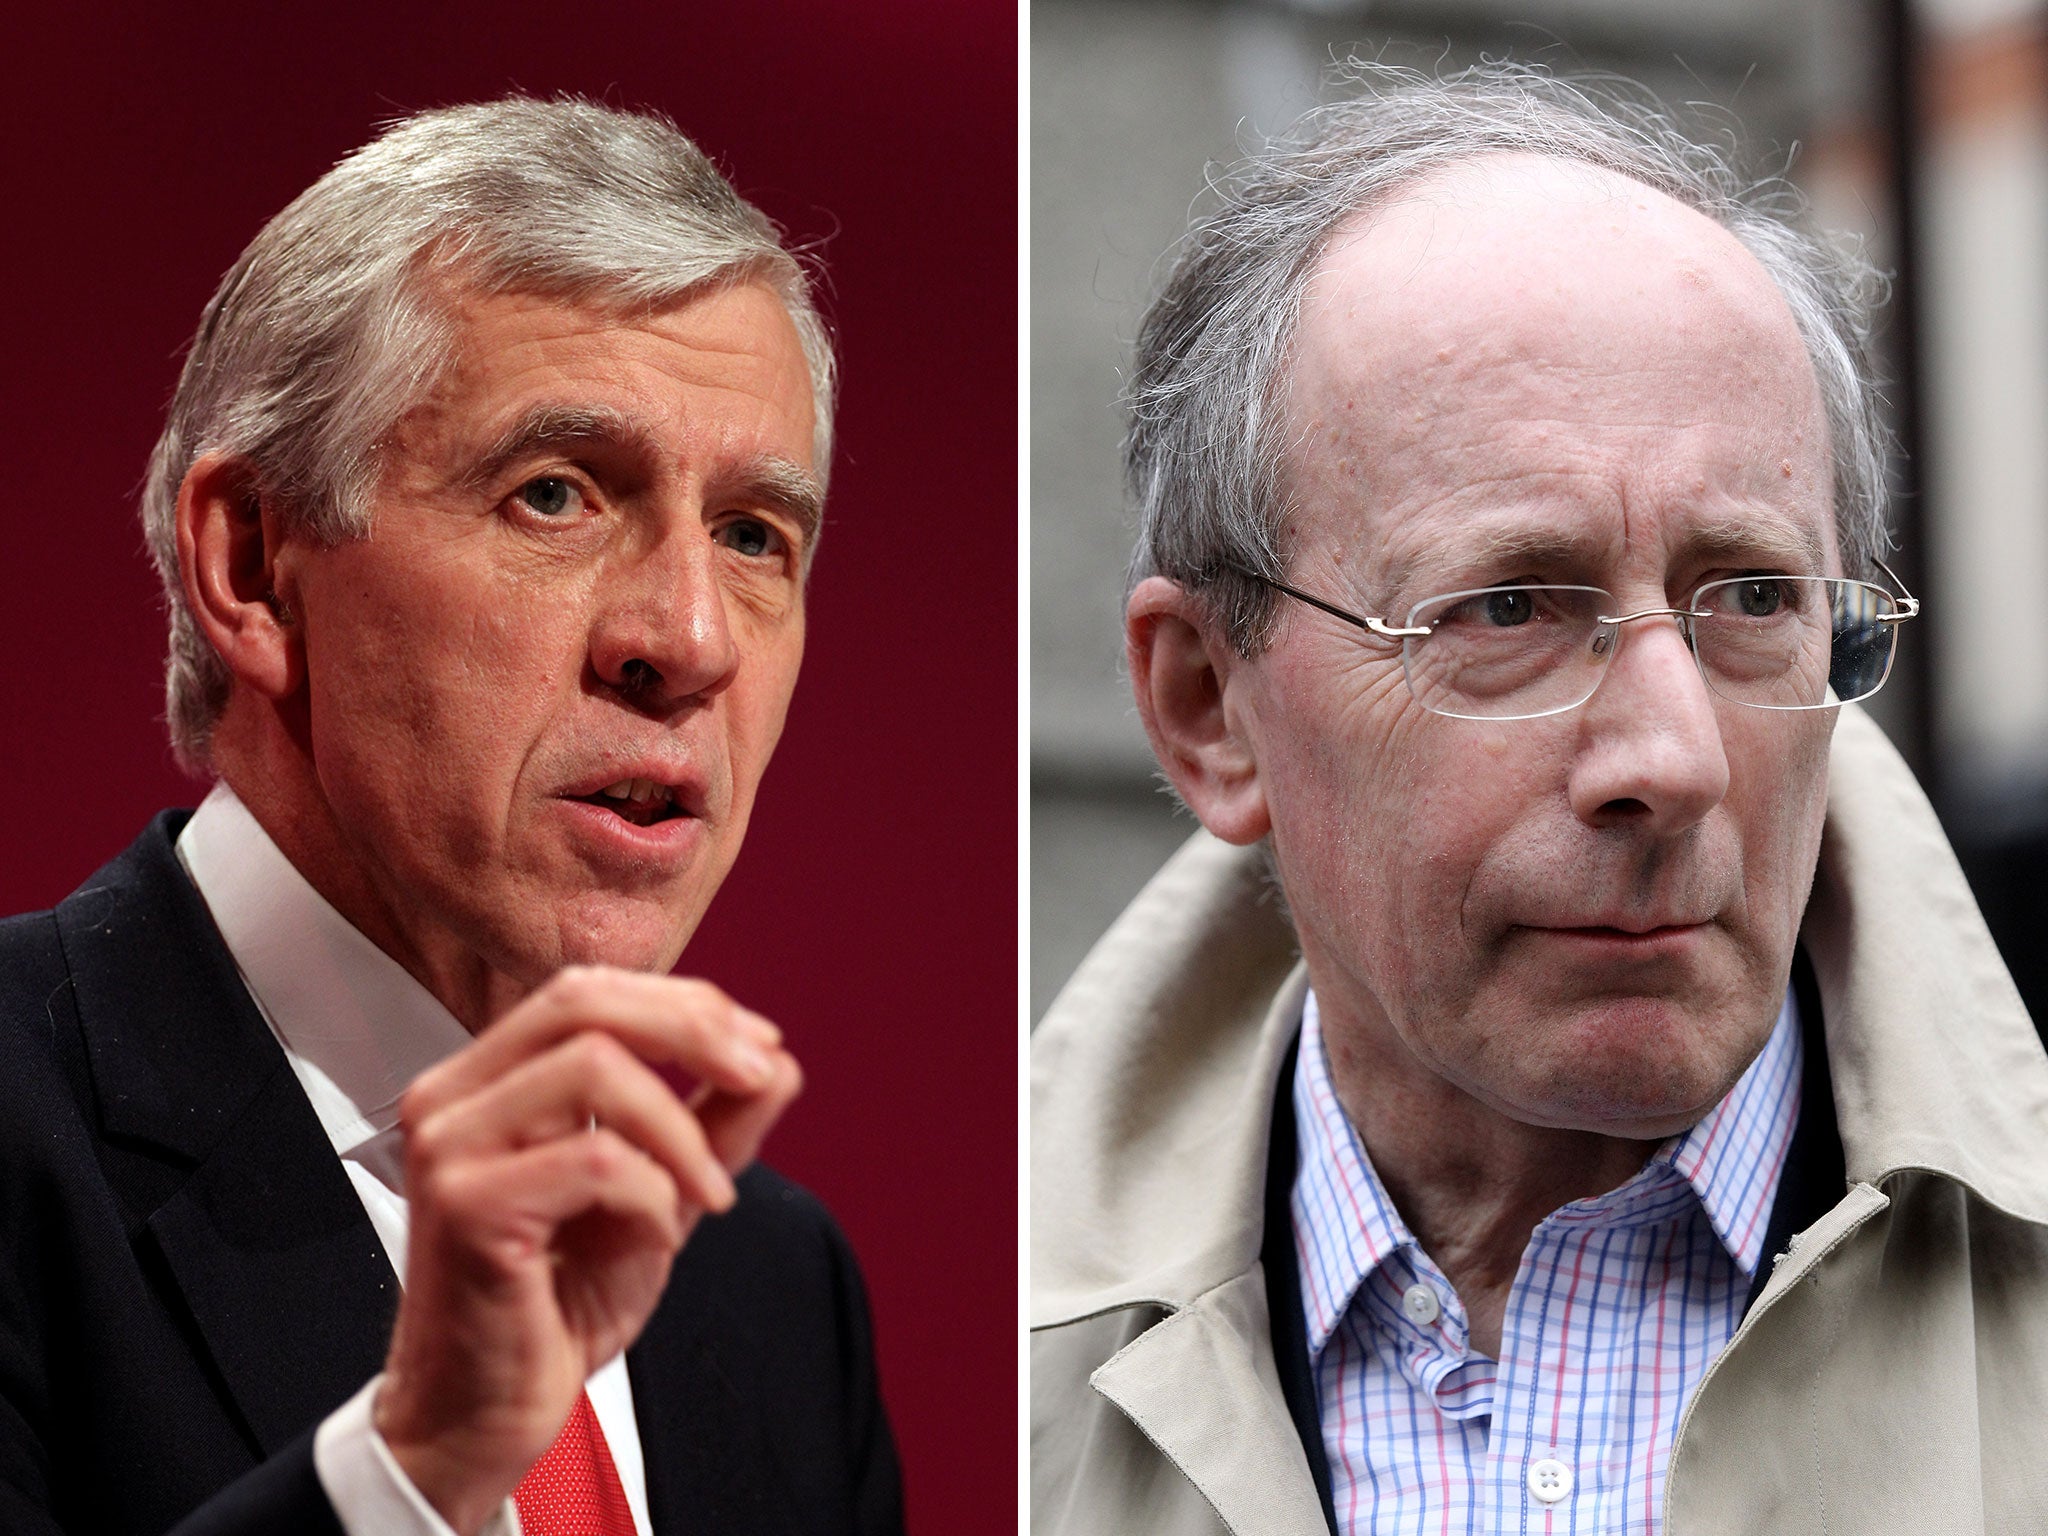 According to reports, the UK Labour Party has suspended Jack Straw, left, and Sir Malcolm Rifkind, right, over corruption allegations in a 'cash for access' scandal